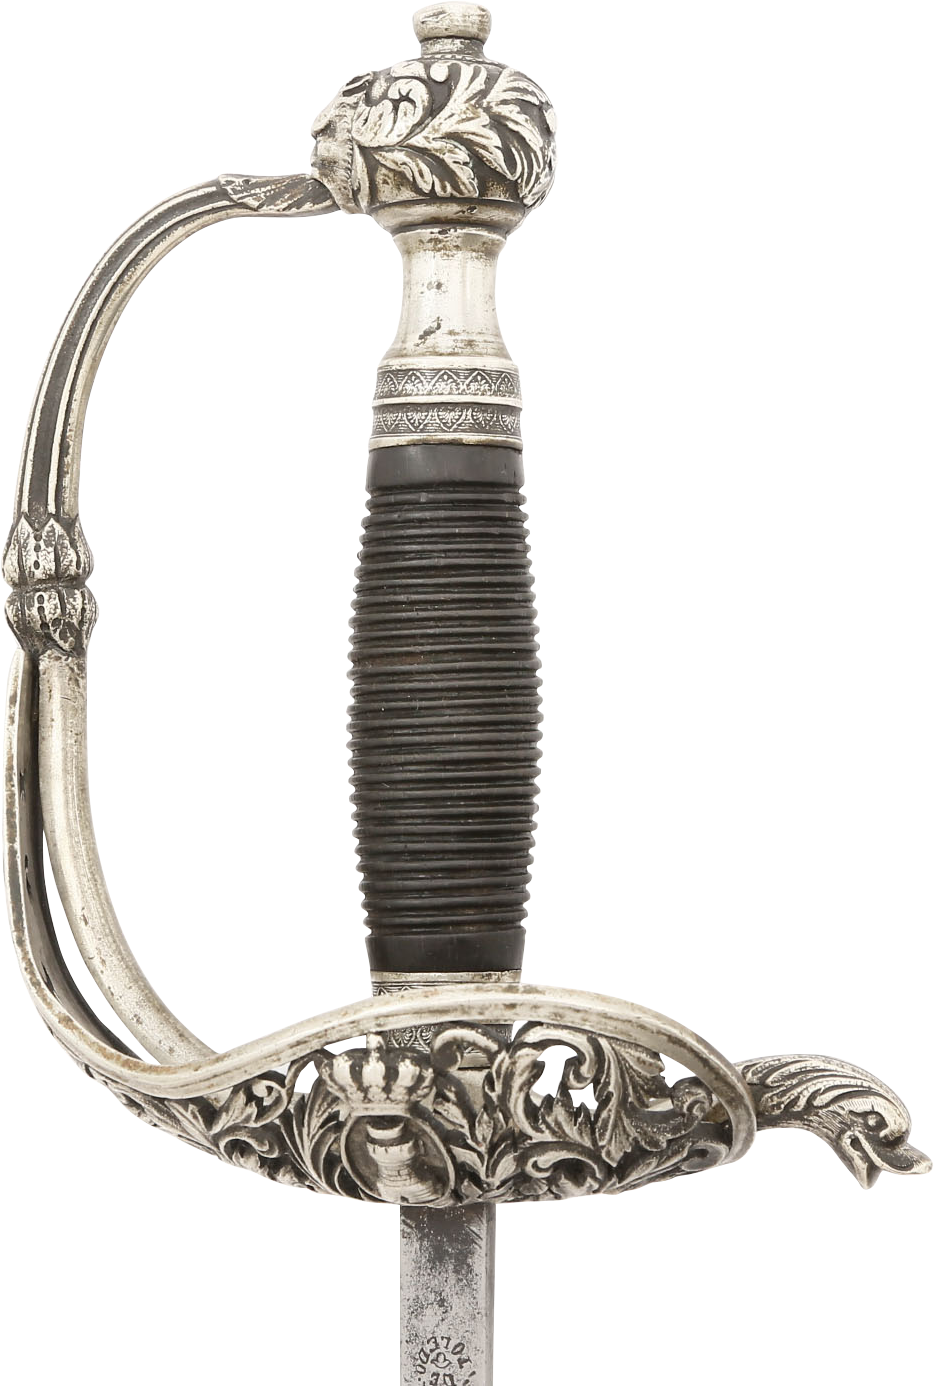 SPANISH 1860 PATTERN SILVER HILTED OFFICER’S SWORD - Fagan Arms